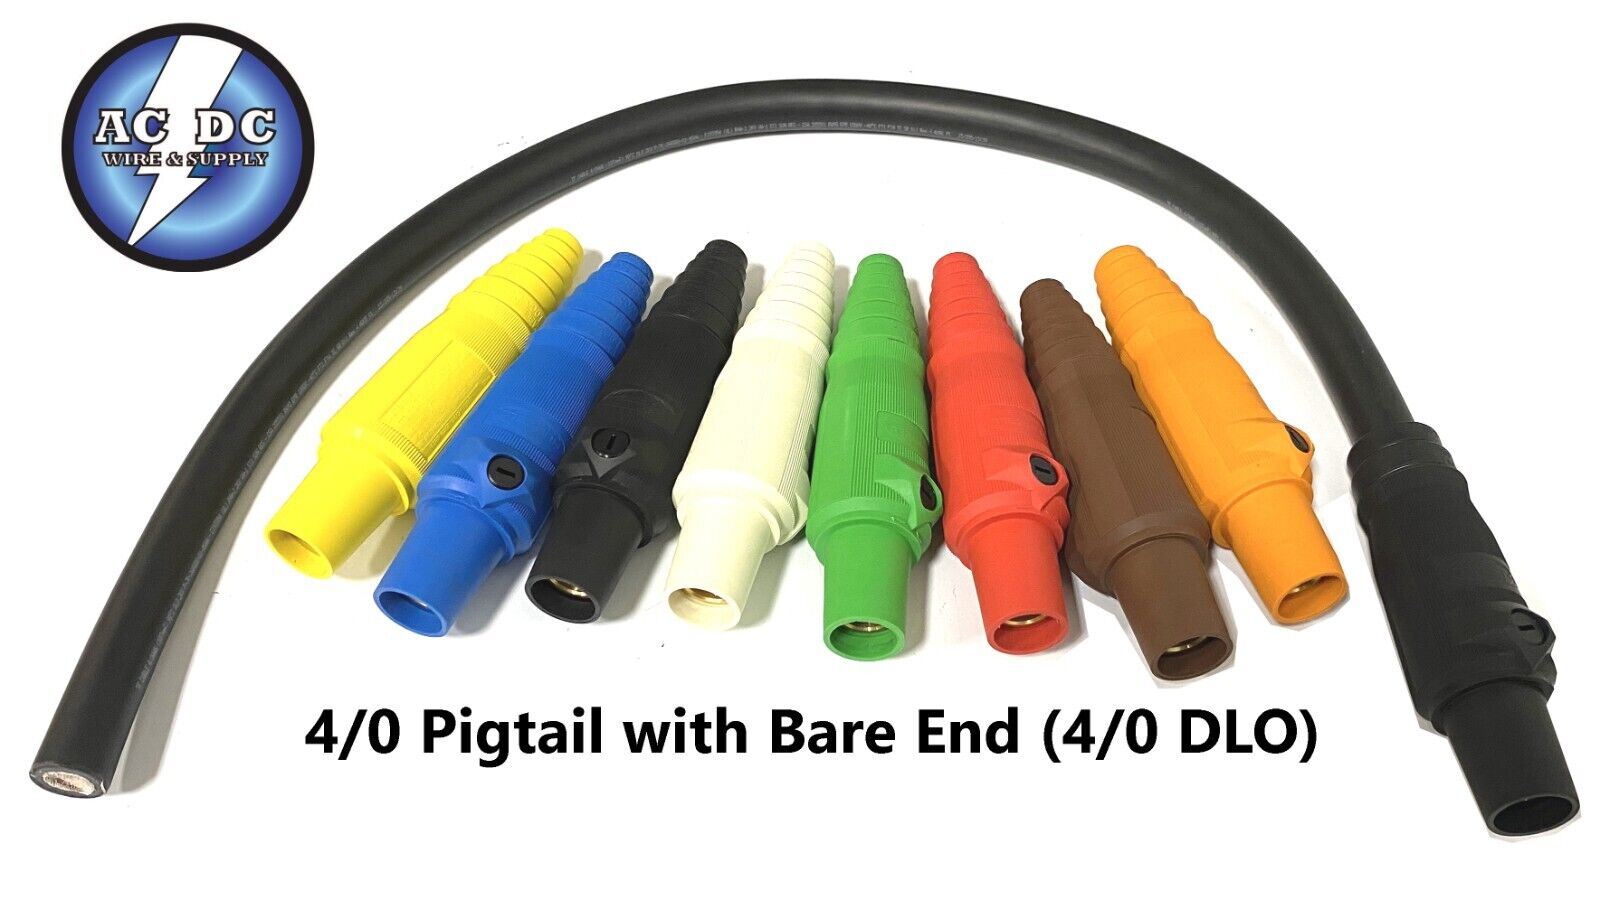 4/0 Pigtail with Bare End (DLO 4/0) GENERATOR CABLES